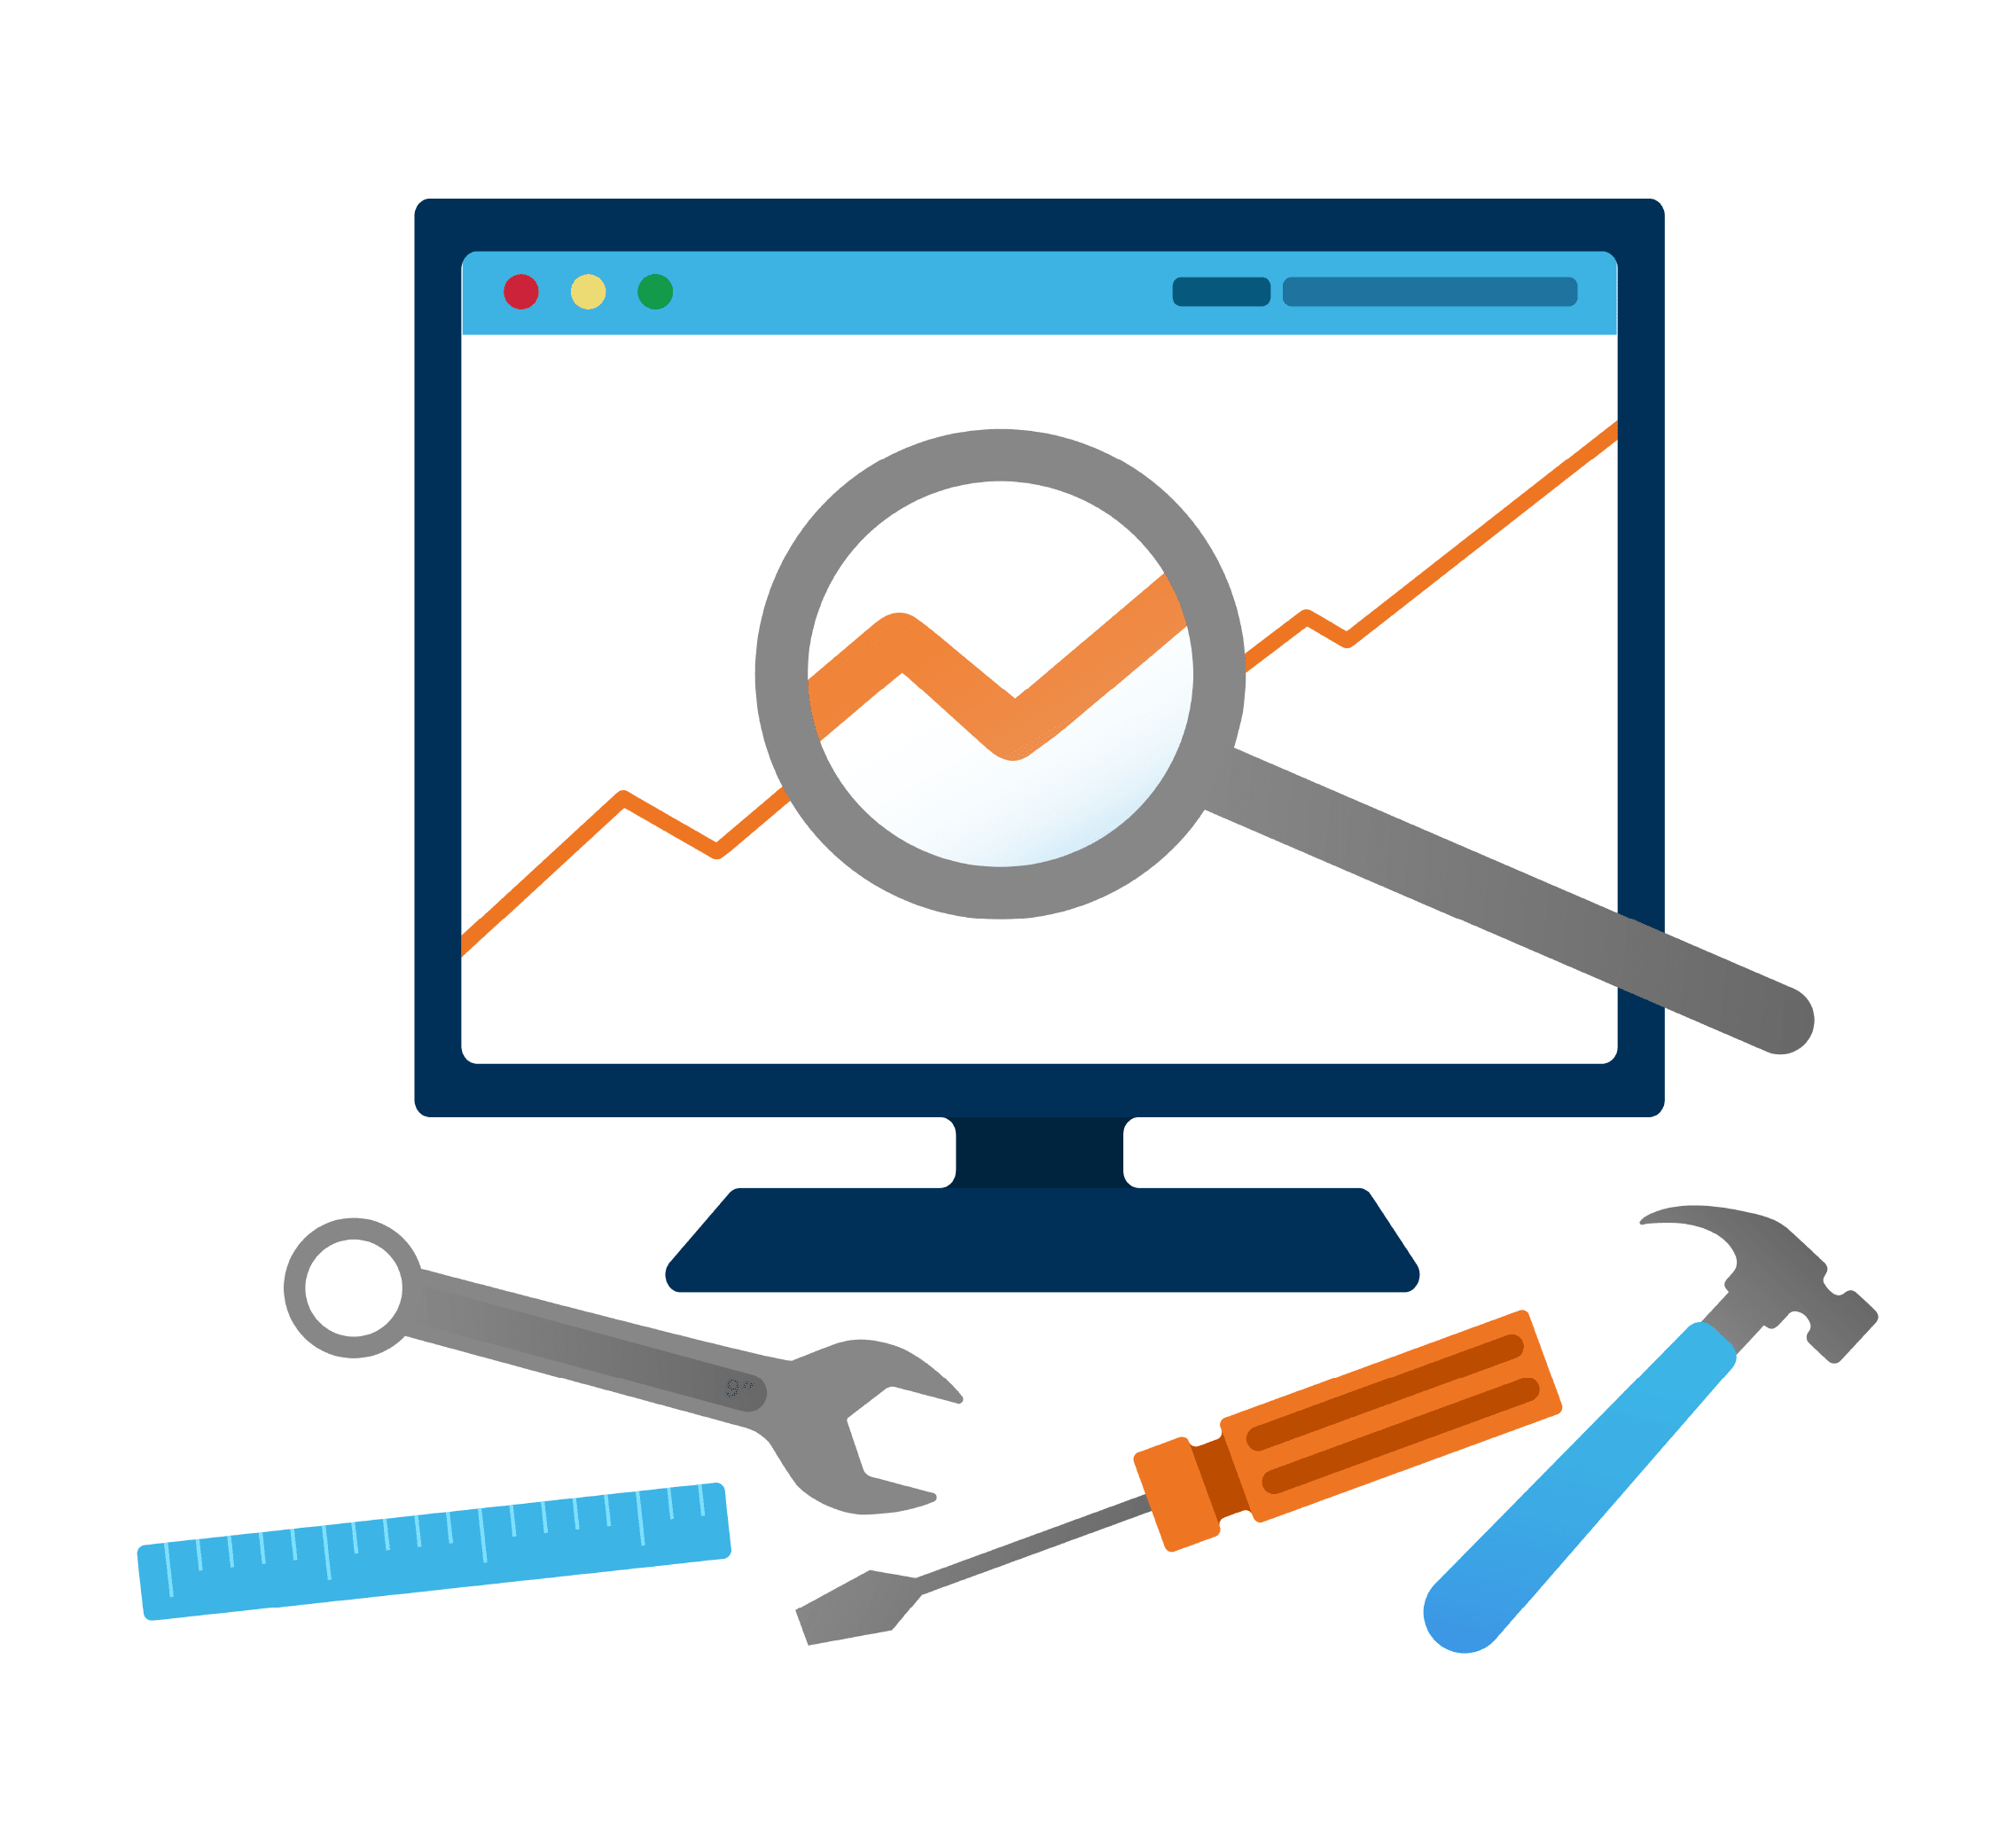 A computer monitor displaying a rising graph under a magnifying glass and tools including a wrench, a ruler, a screwdriver, and a hammer in front of the monitor.